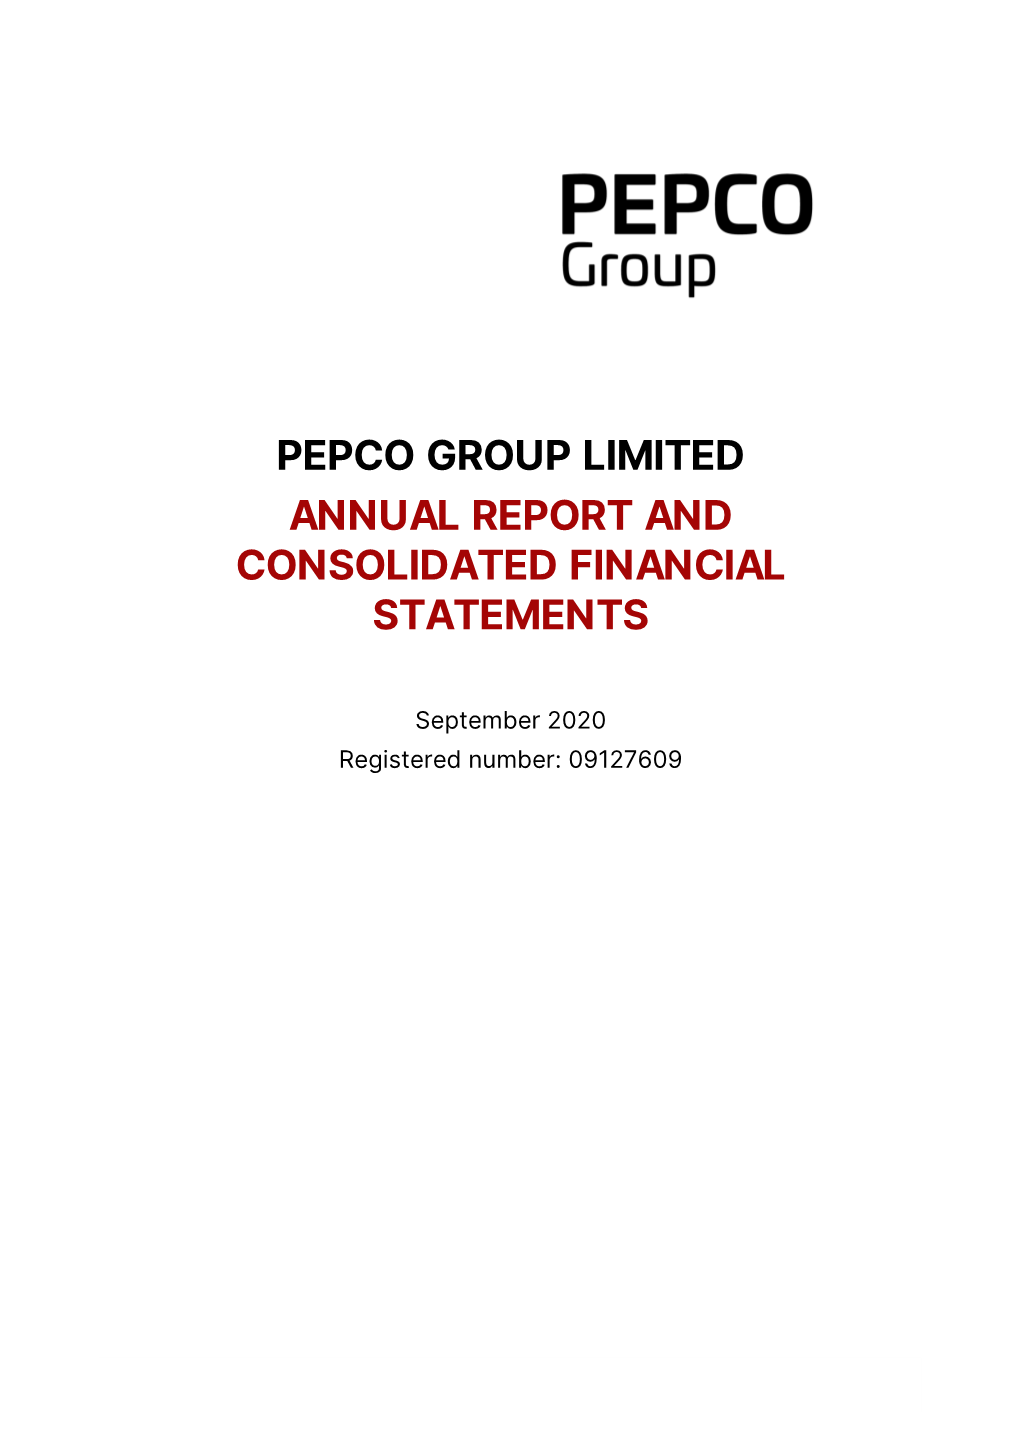 Pepco Group Limited Annual Report and Consolidated Financial Statements